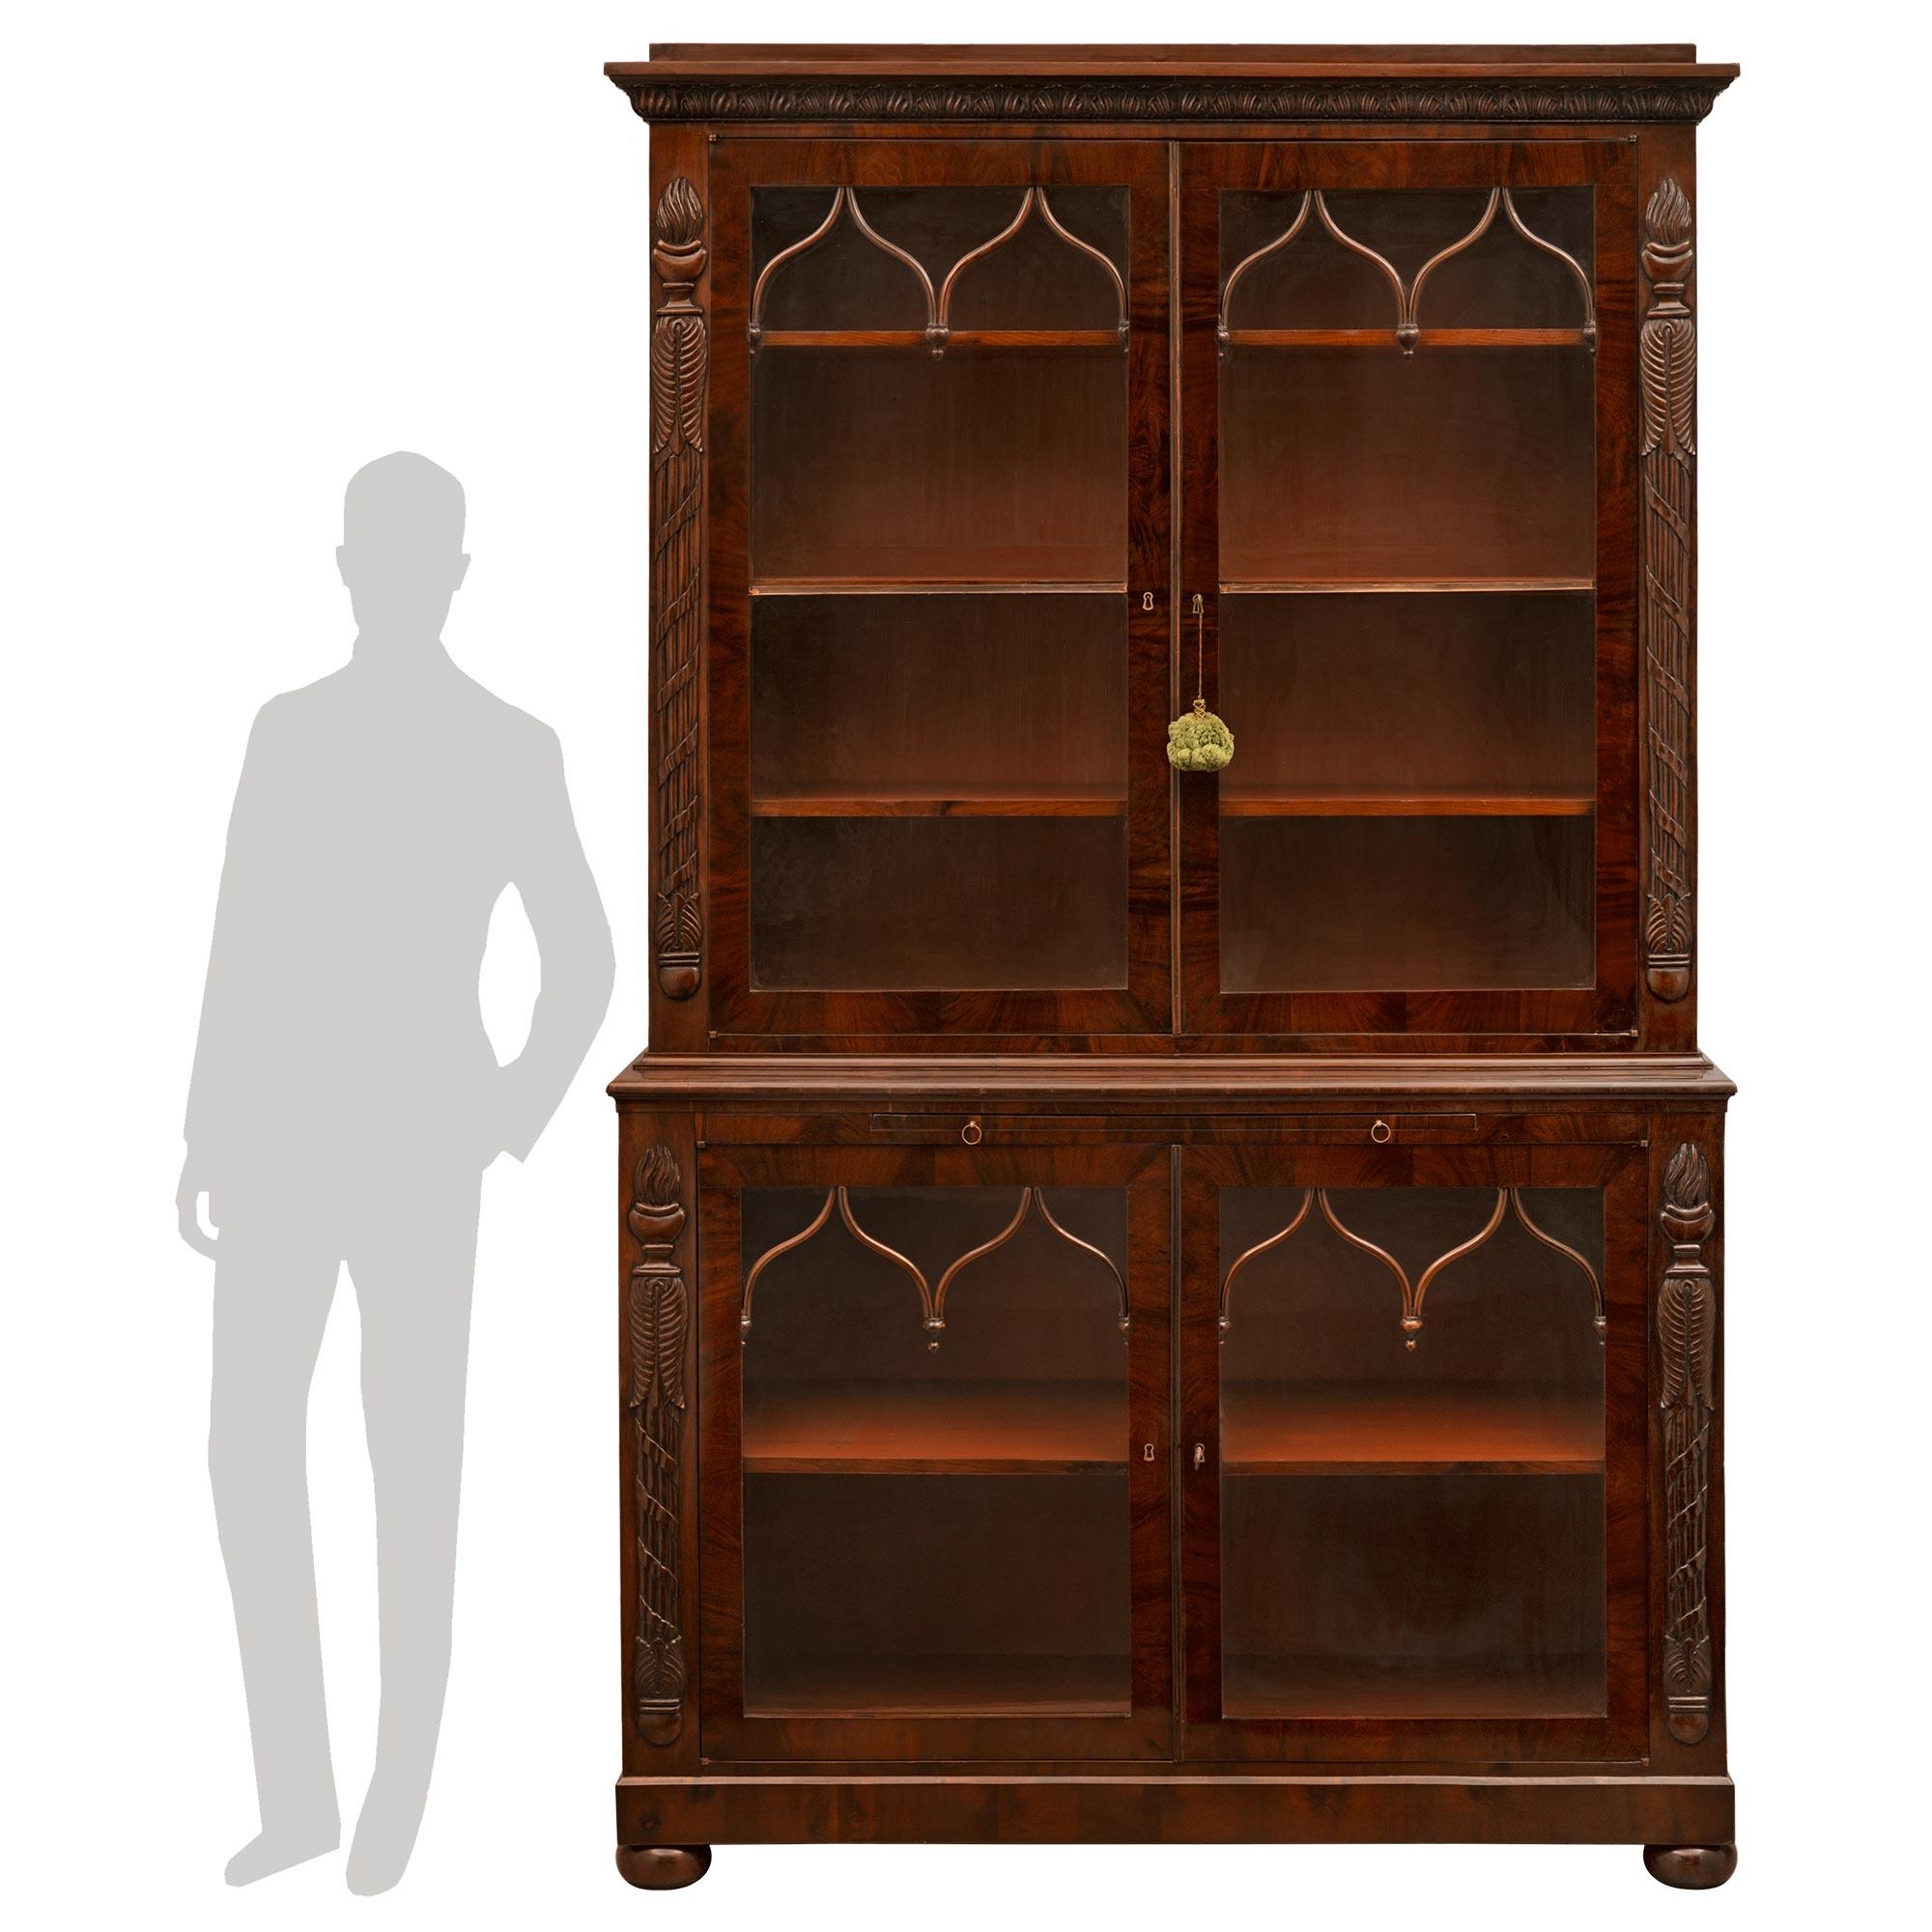 A spectacular and rare pair of Italian early 19th century, circa 1810, First Empire Period vitrines. Each crouch mahogany vitrine is raised on bun feet below two sets of double cabinet doors with the original hand blown inserted glass and original